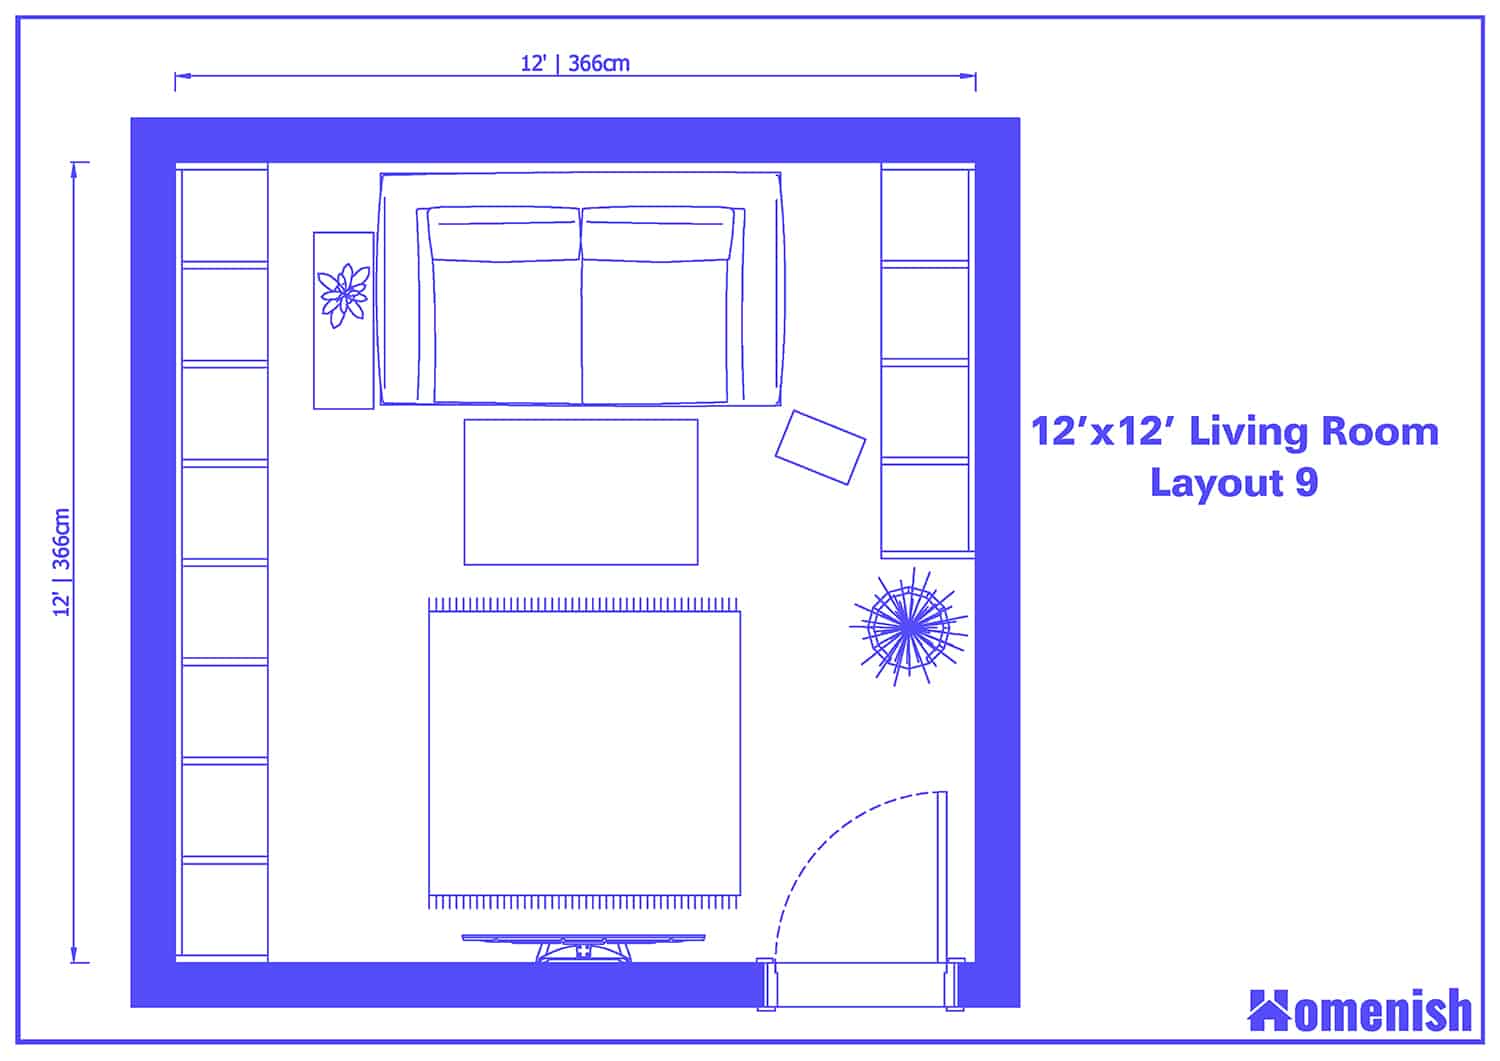 24x13 living room layout